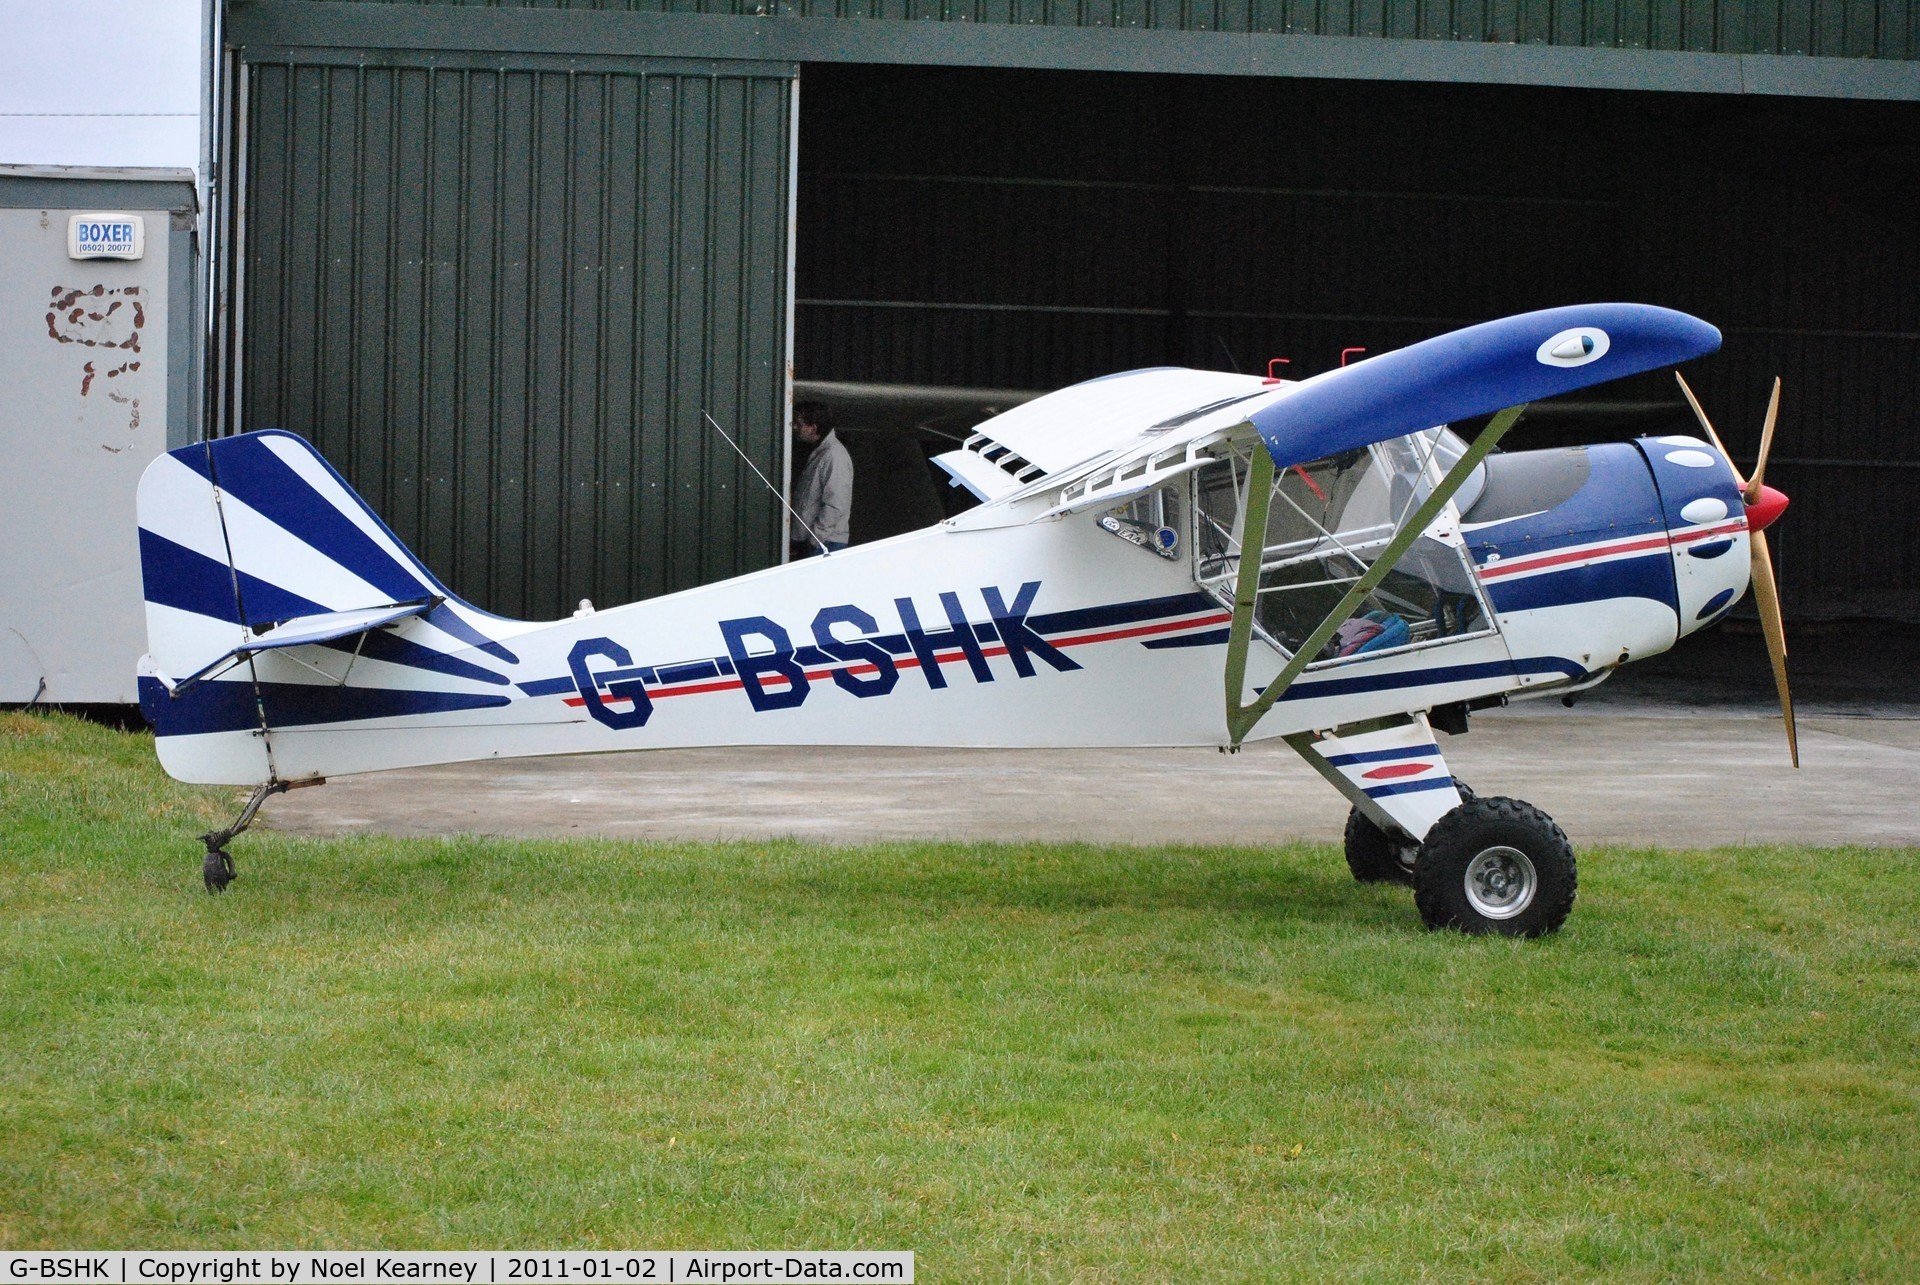 G-BSHK, 1991 Denney Kitfox Mk.2 C/N PFA 172-11752, Photographed at Limetree Airfield at the New Year Fly-in.